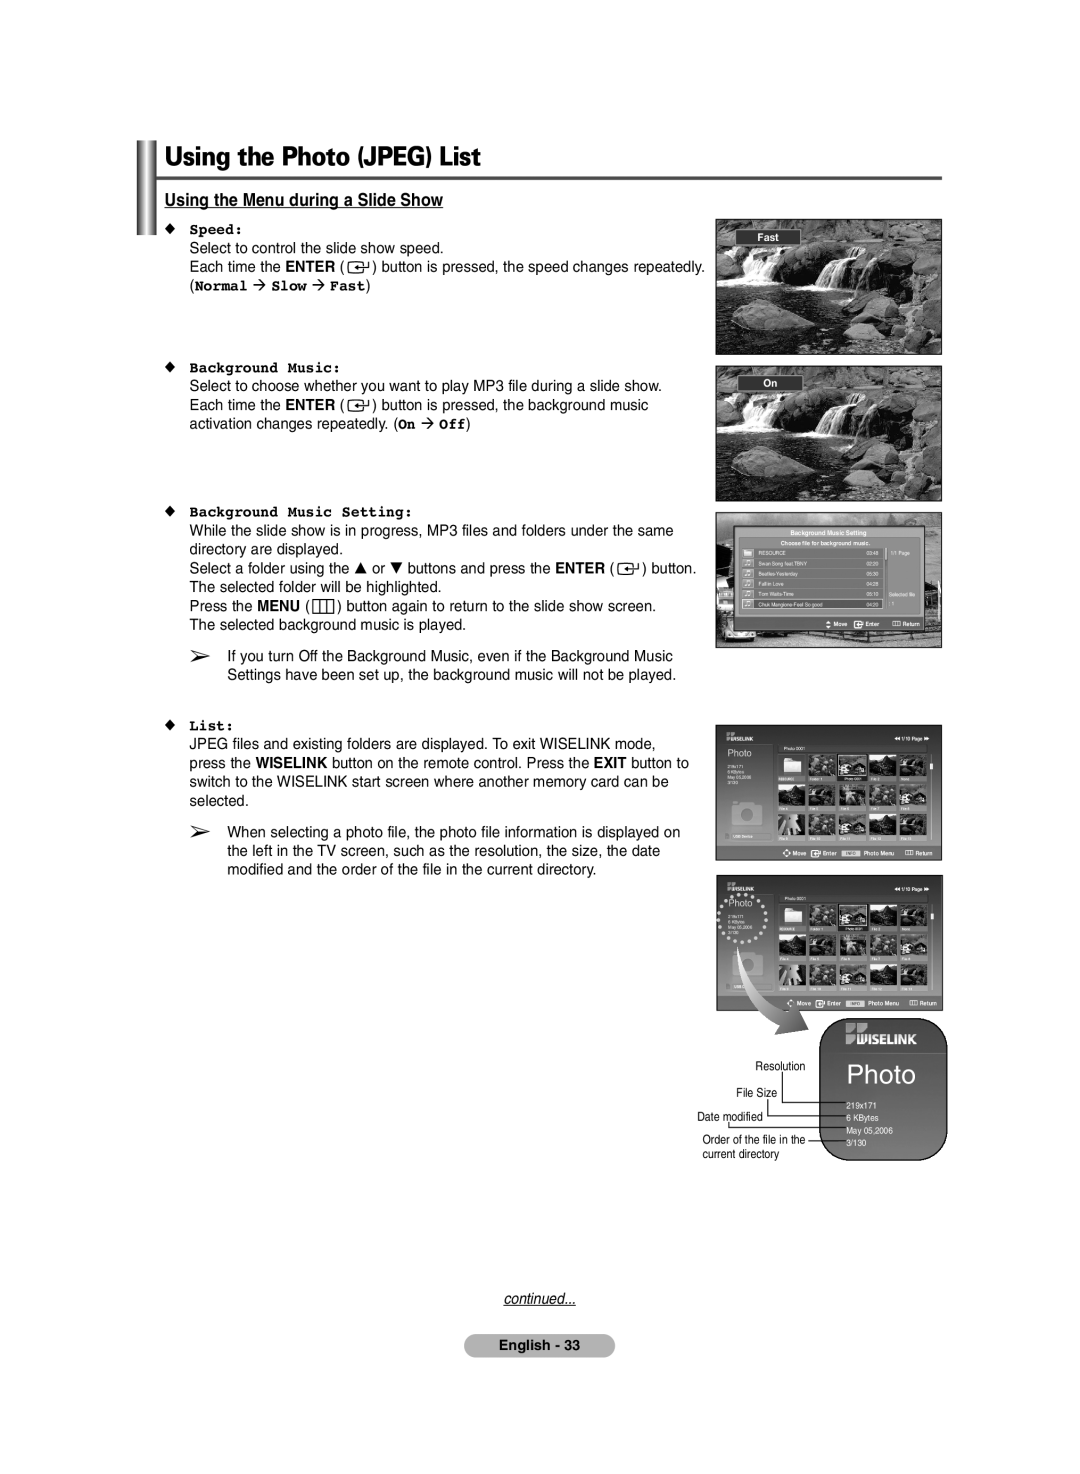 Samsung PDP-TELEVISION manual Using the Menu during a Slide Show, Speed, Normal Slow Fast, Background Music, Photo, List 